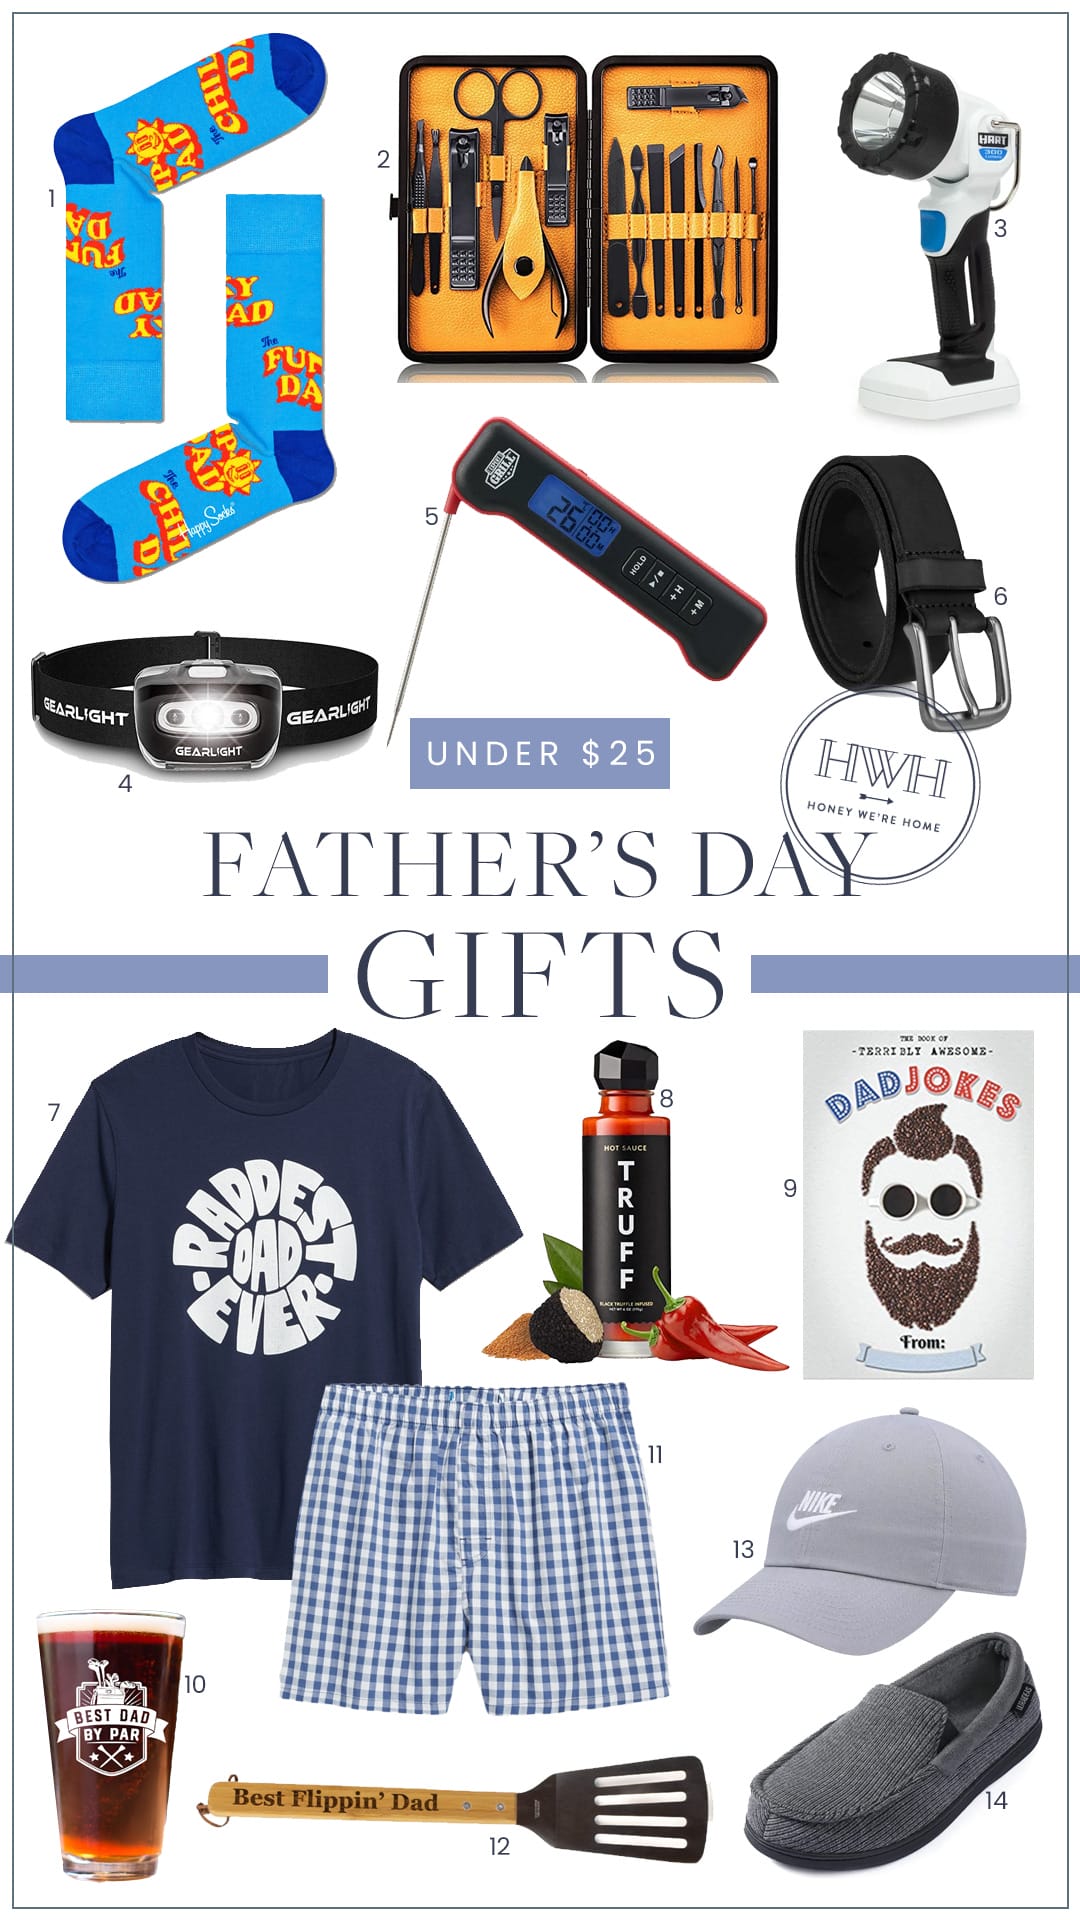 Father's Day Gift Idea: DVD Season packs of Burn Notice and White Collar –  giveaway